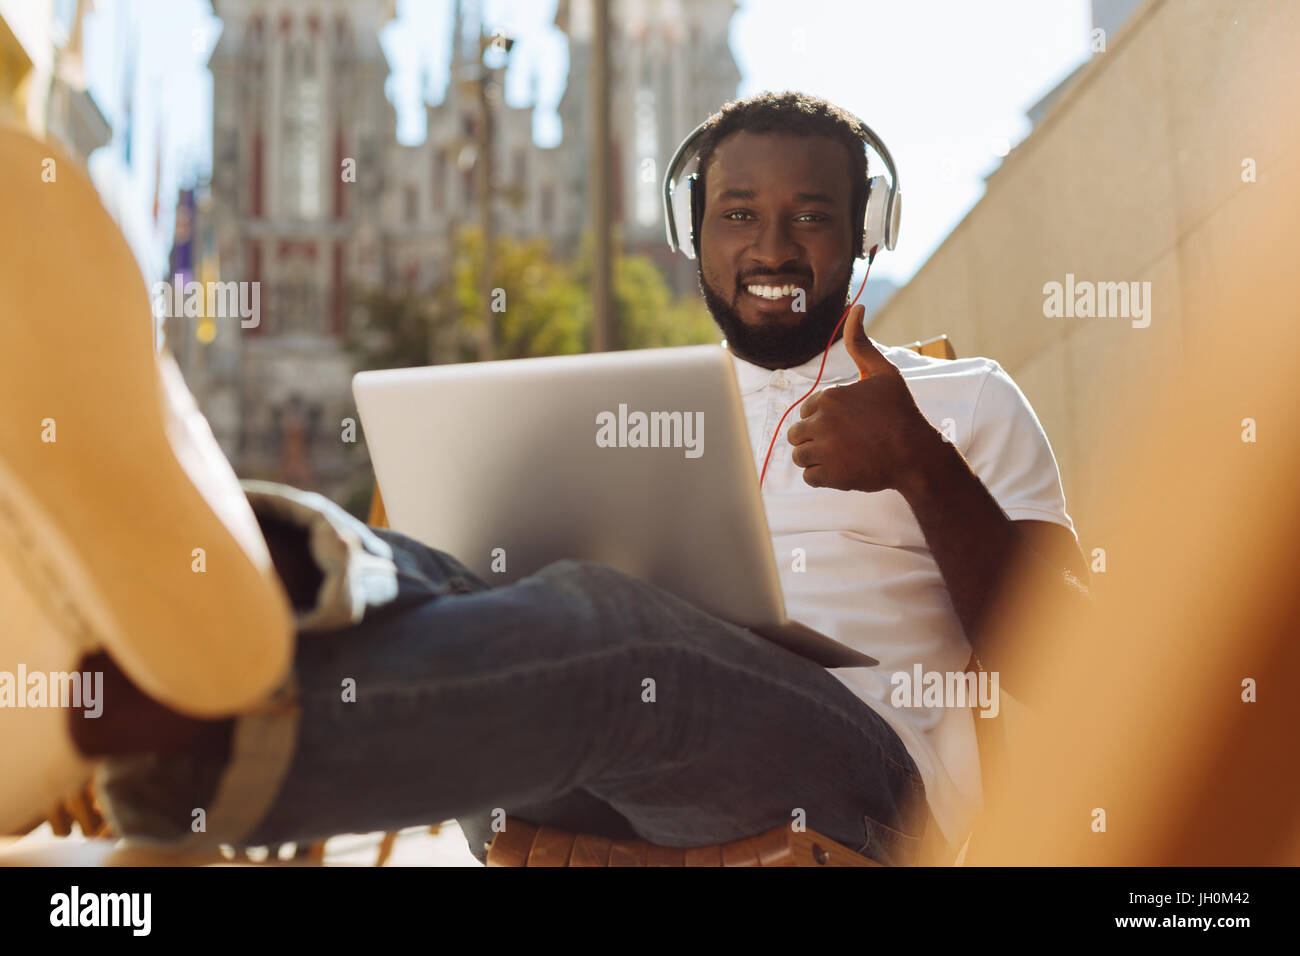 Independent motivated man having a productive day Stock Photo